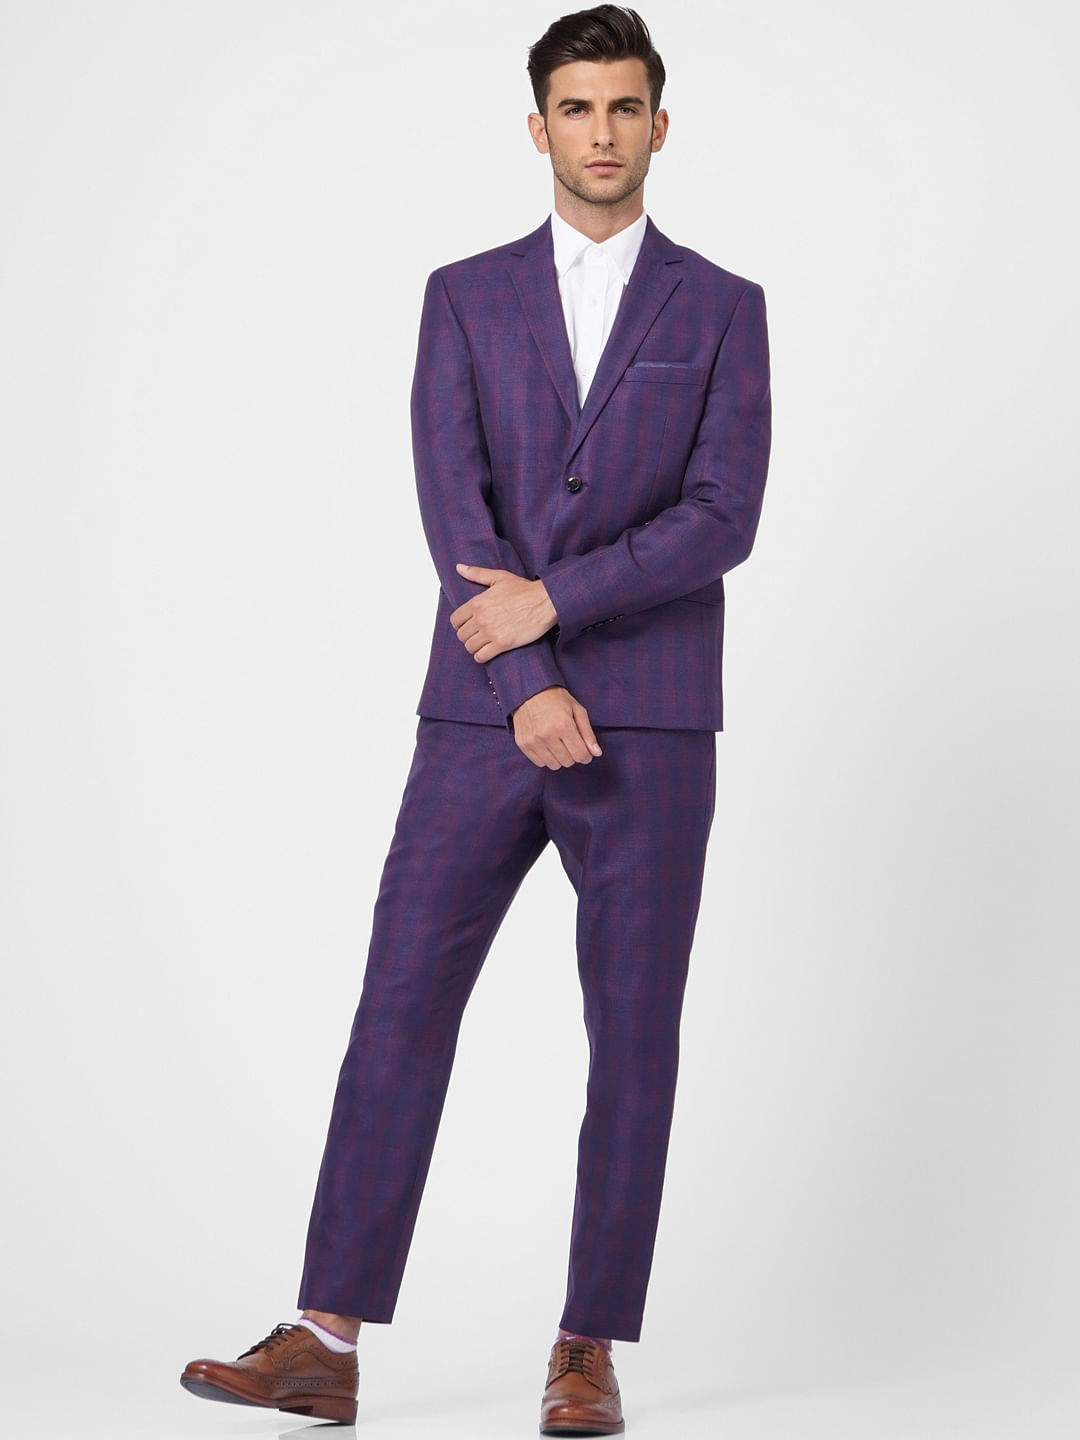 Ben Sherman  Purple Checked Skinny Fit Trousers  Suit Direct